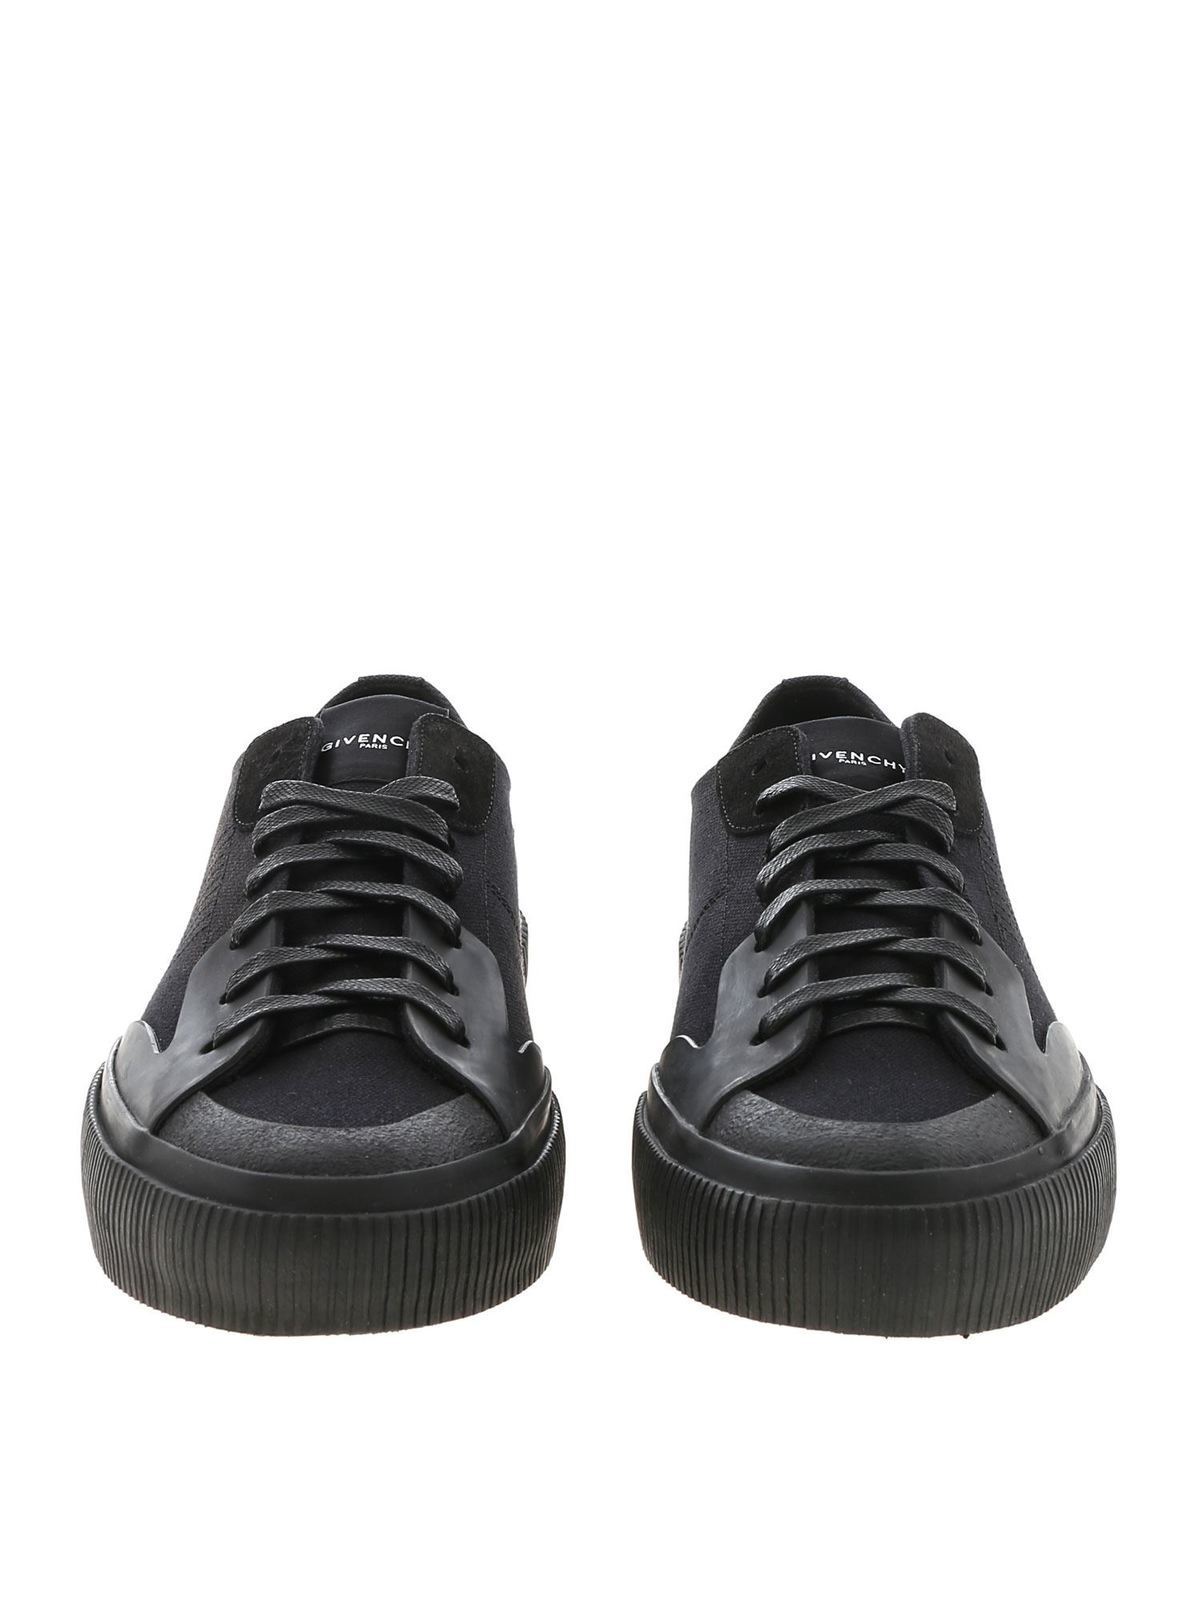 Givenchy - Tennis Light sneakers in 